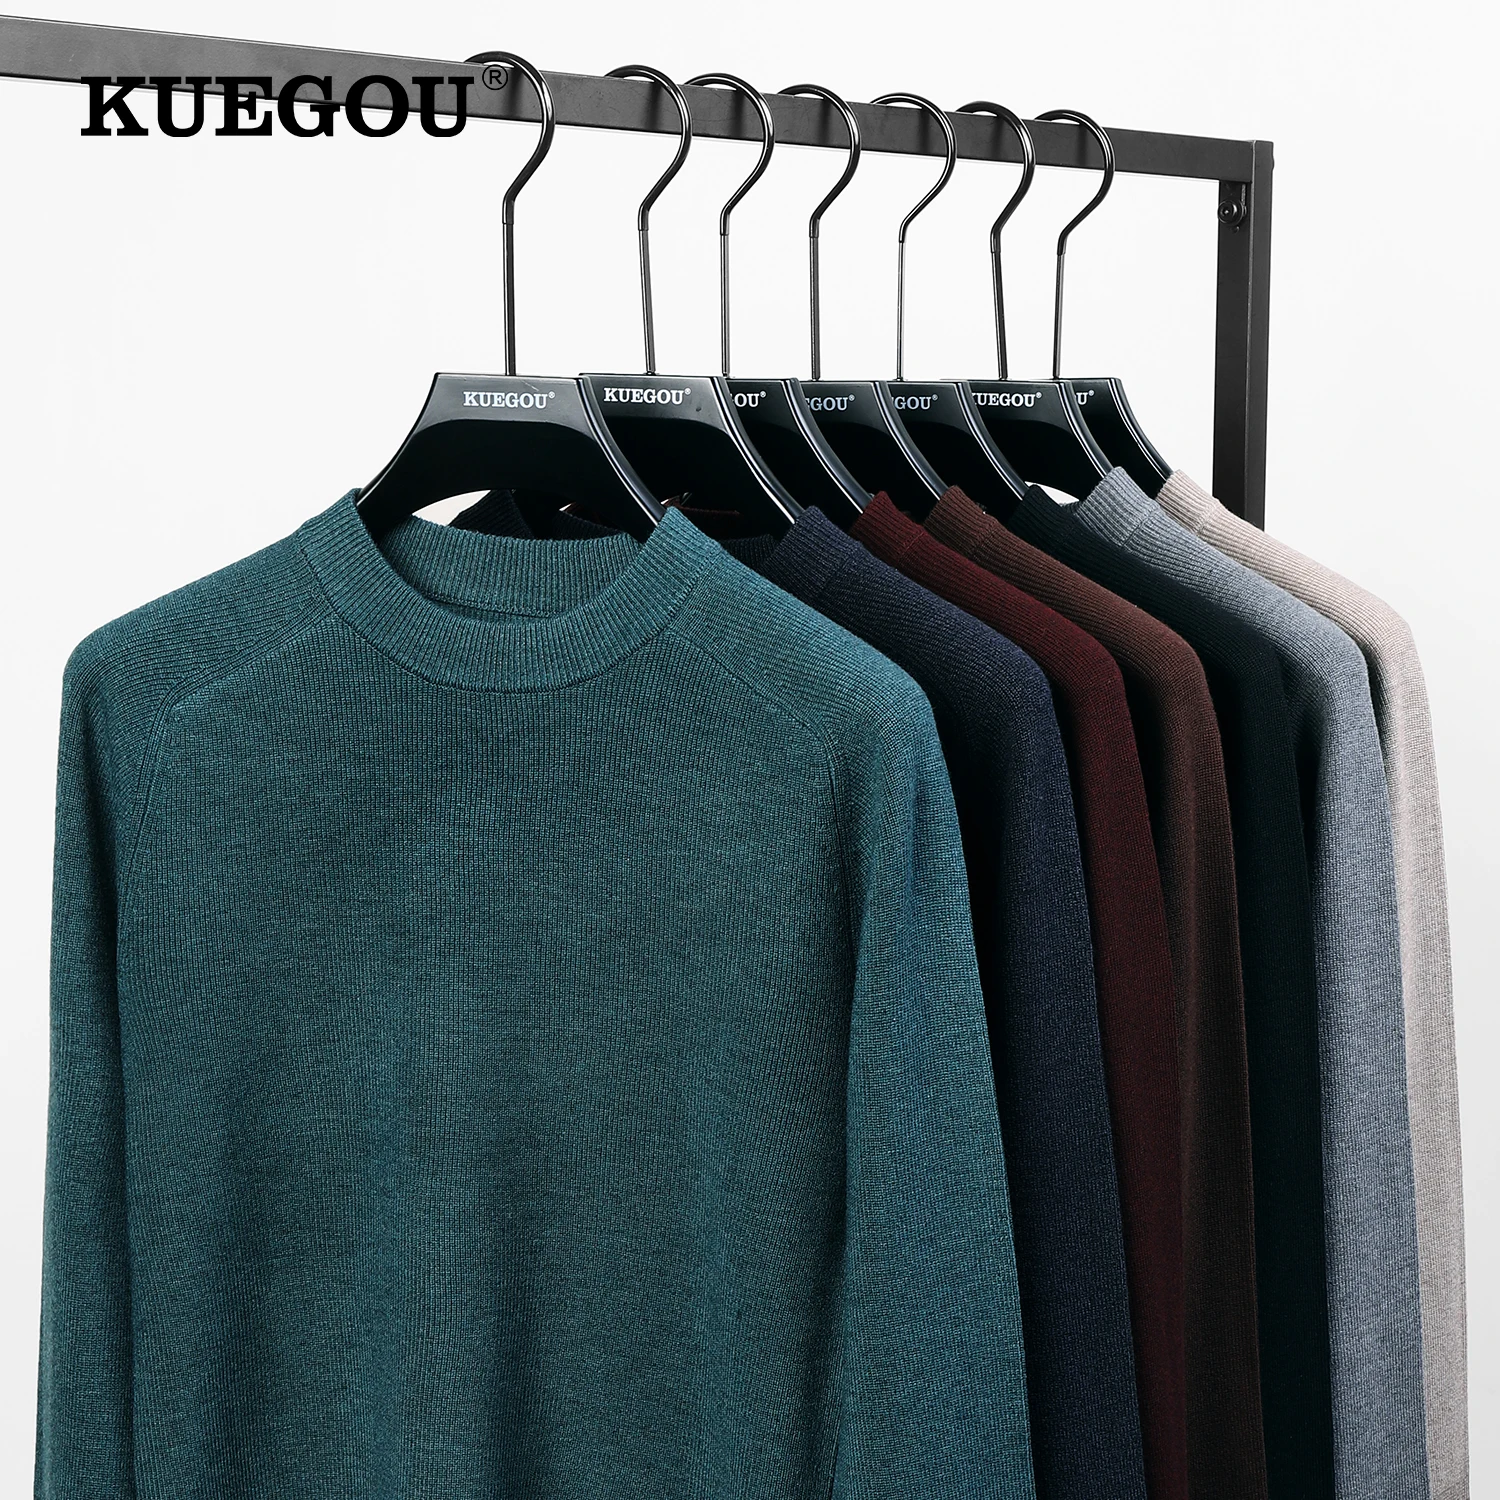 

KUEGOU 2022 Autumn Winter New Men Sweater Solid Color Fashion High Quality Warm Knitting Pullovers Wool Blend Top Plus Size 875